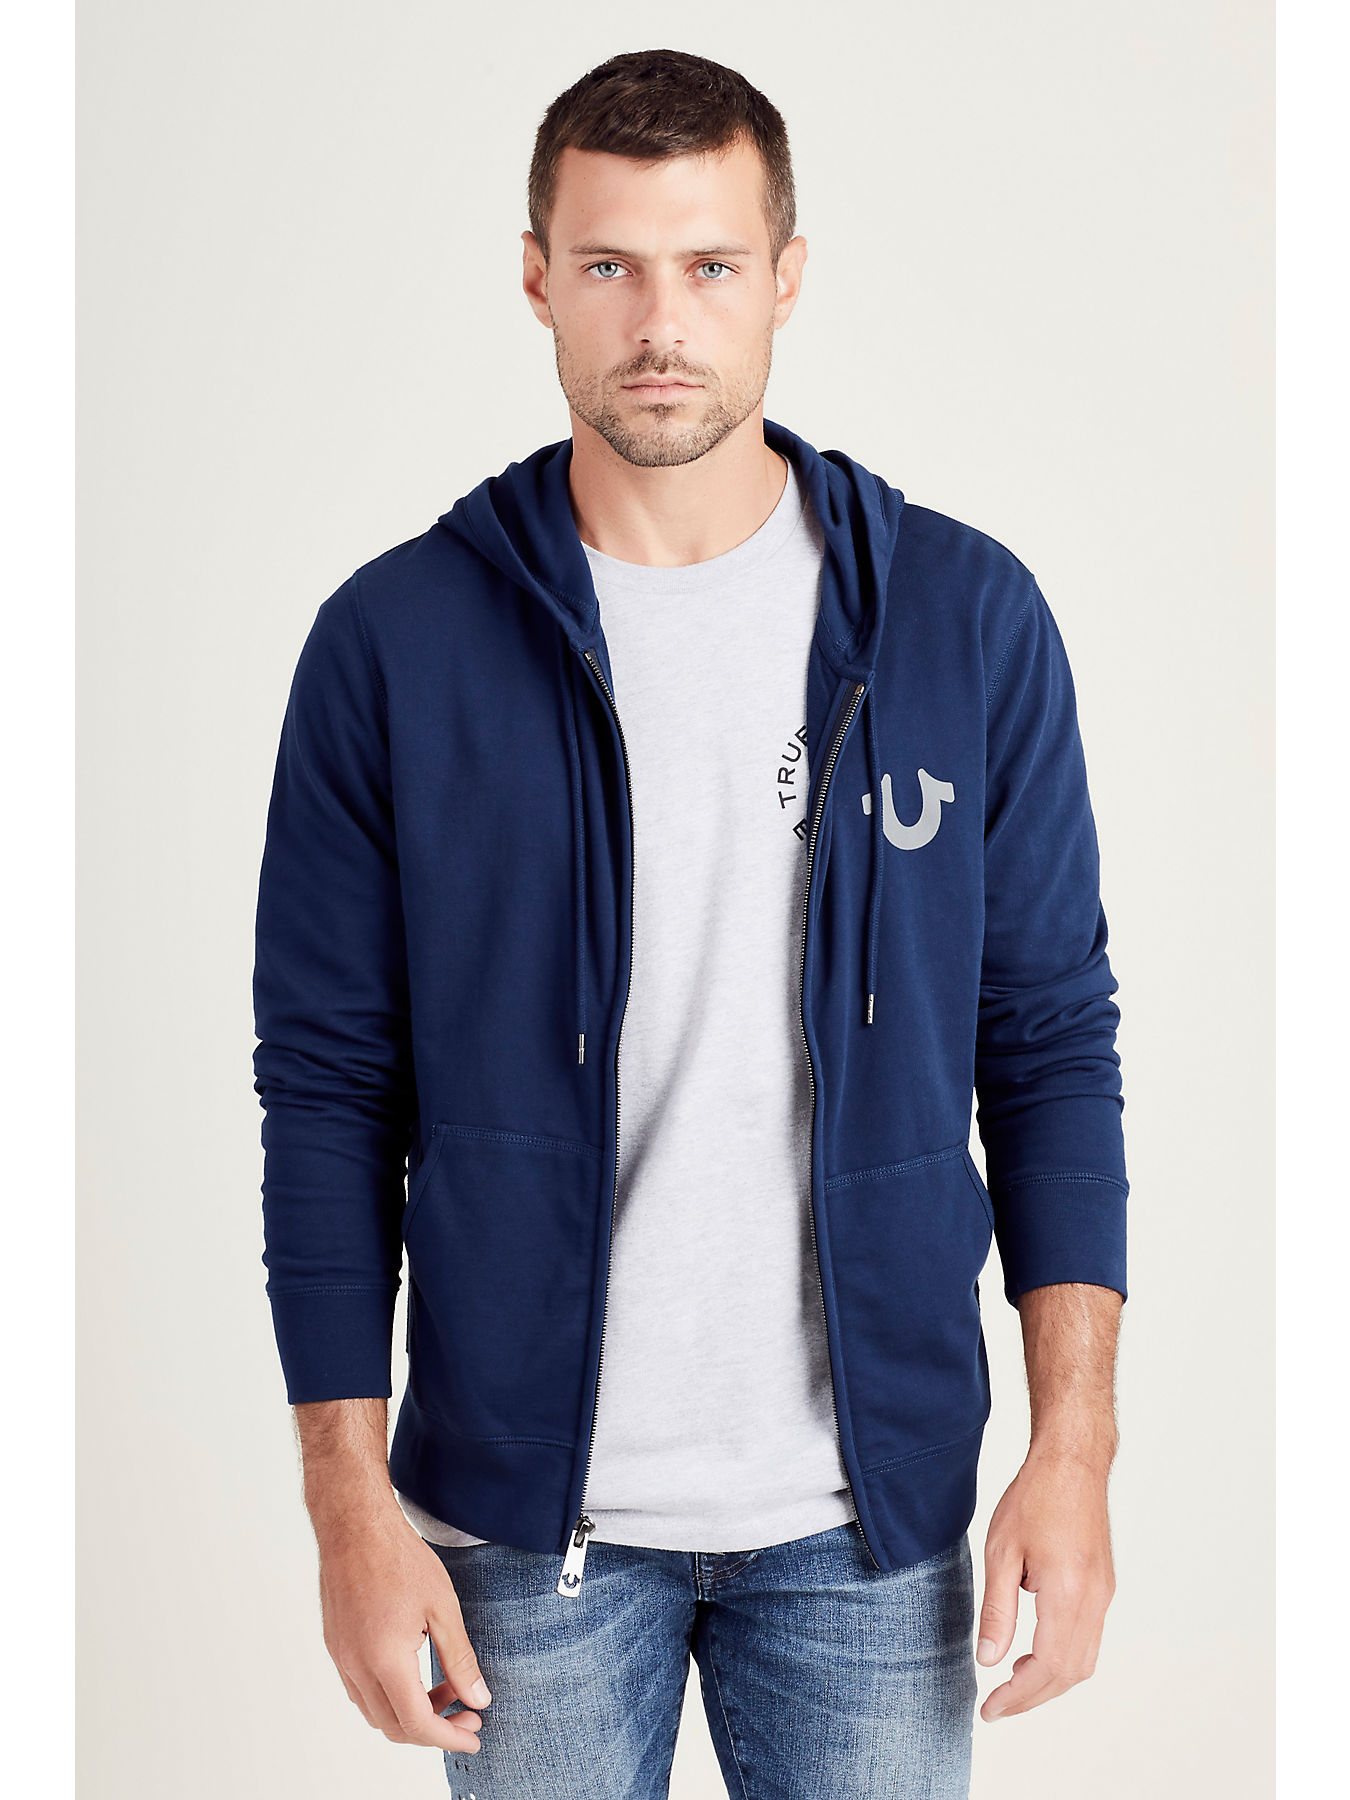 CRAFTED WITH PRIDE MENS HOODIE - True Religion